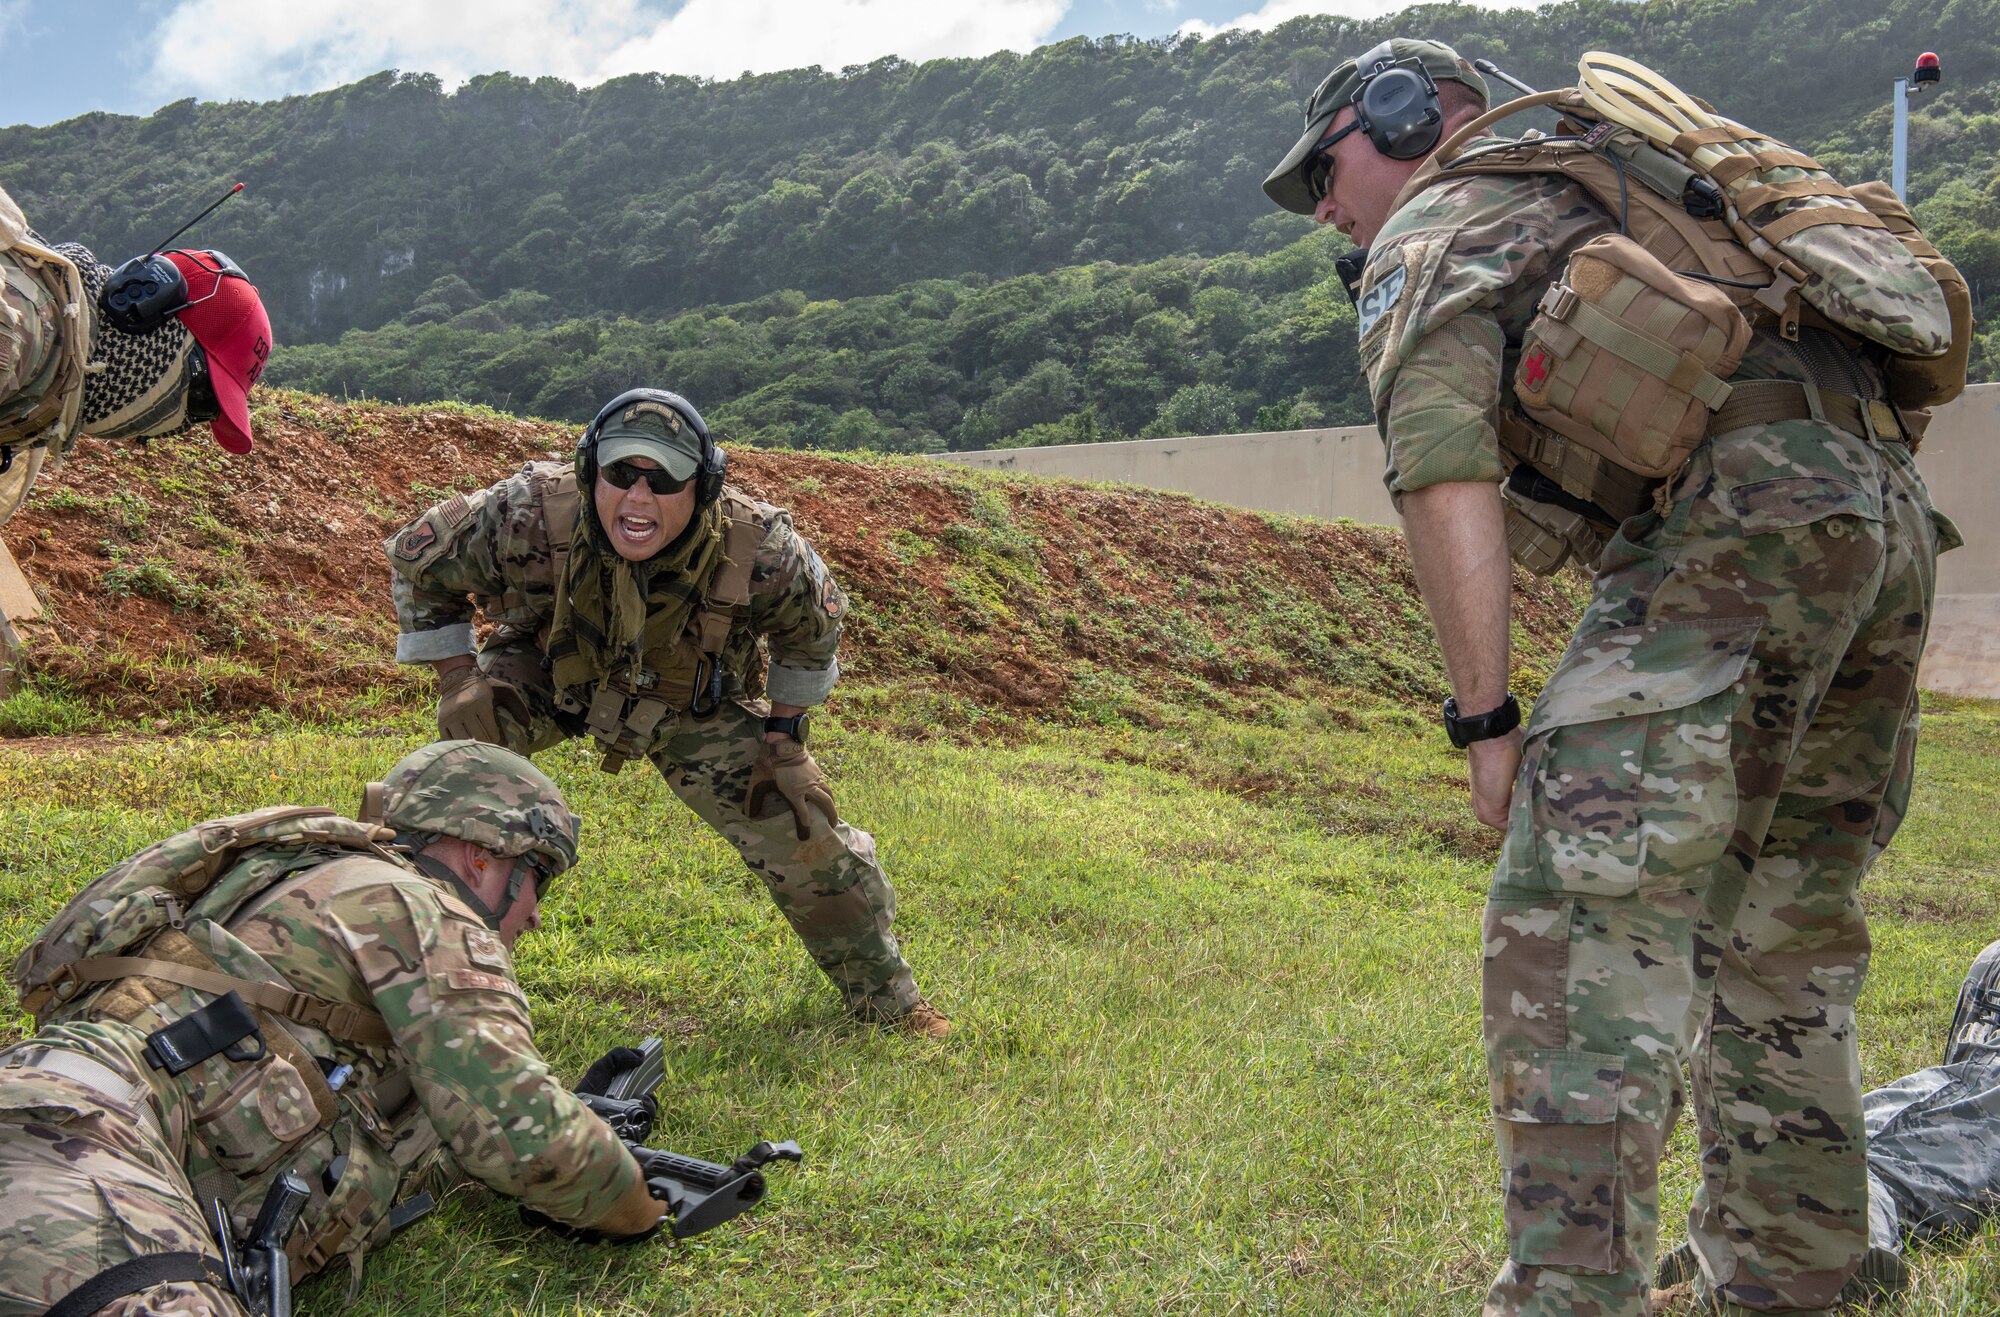 Staff Sgt. Jared Palomo, 736h Security Forces Squadron Commando Warrior instructor, motivates a student during tier 1 and 2 training at North West Field near Andersen Air Force Base, Guam Dec. 10, 2018. The 736th SFS trains frontline defenders from all bases assigned to Pacific Air Forces on U.S. Central Command and regional training requirements so they can deploy as well as utilize trained skills at their home stations, (U.S. Air Force photo by Master Sgt. JT May III)